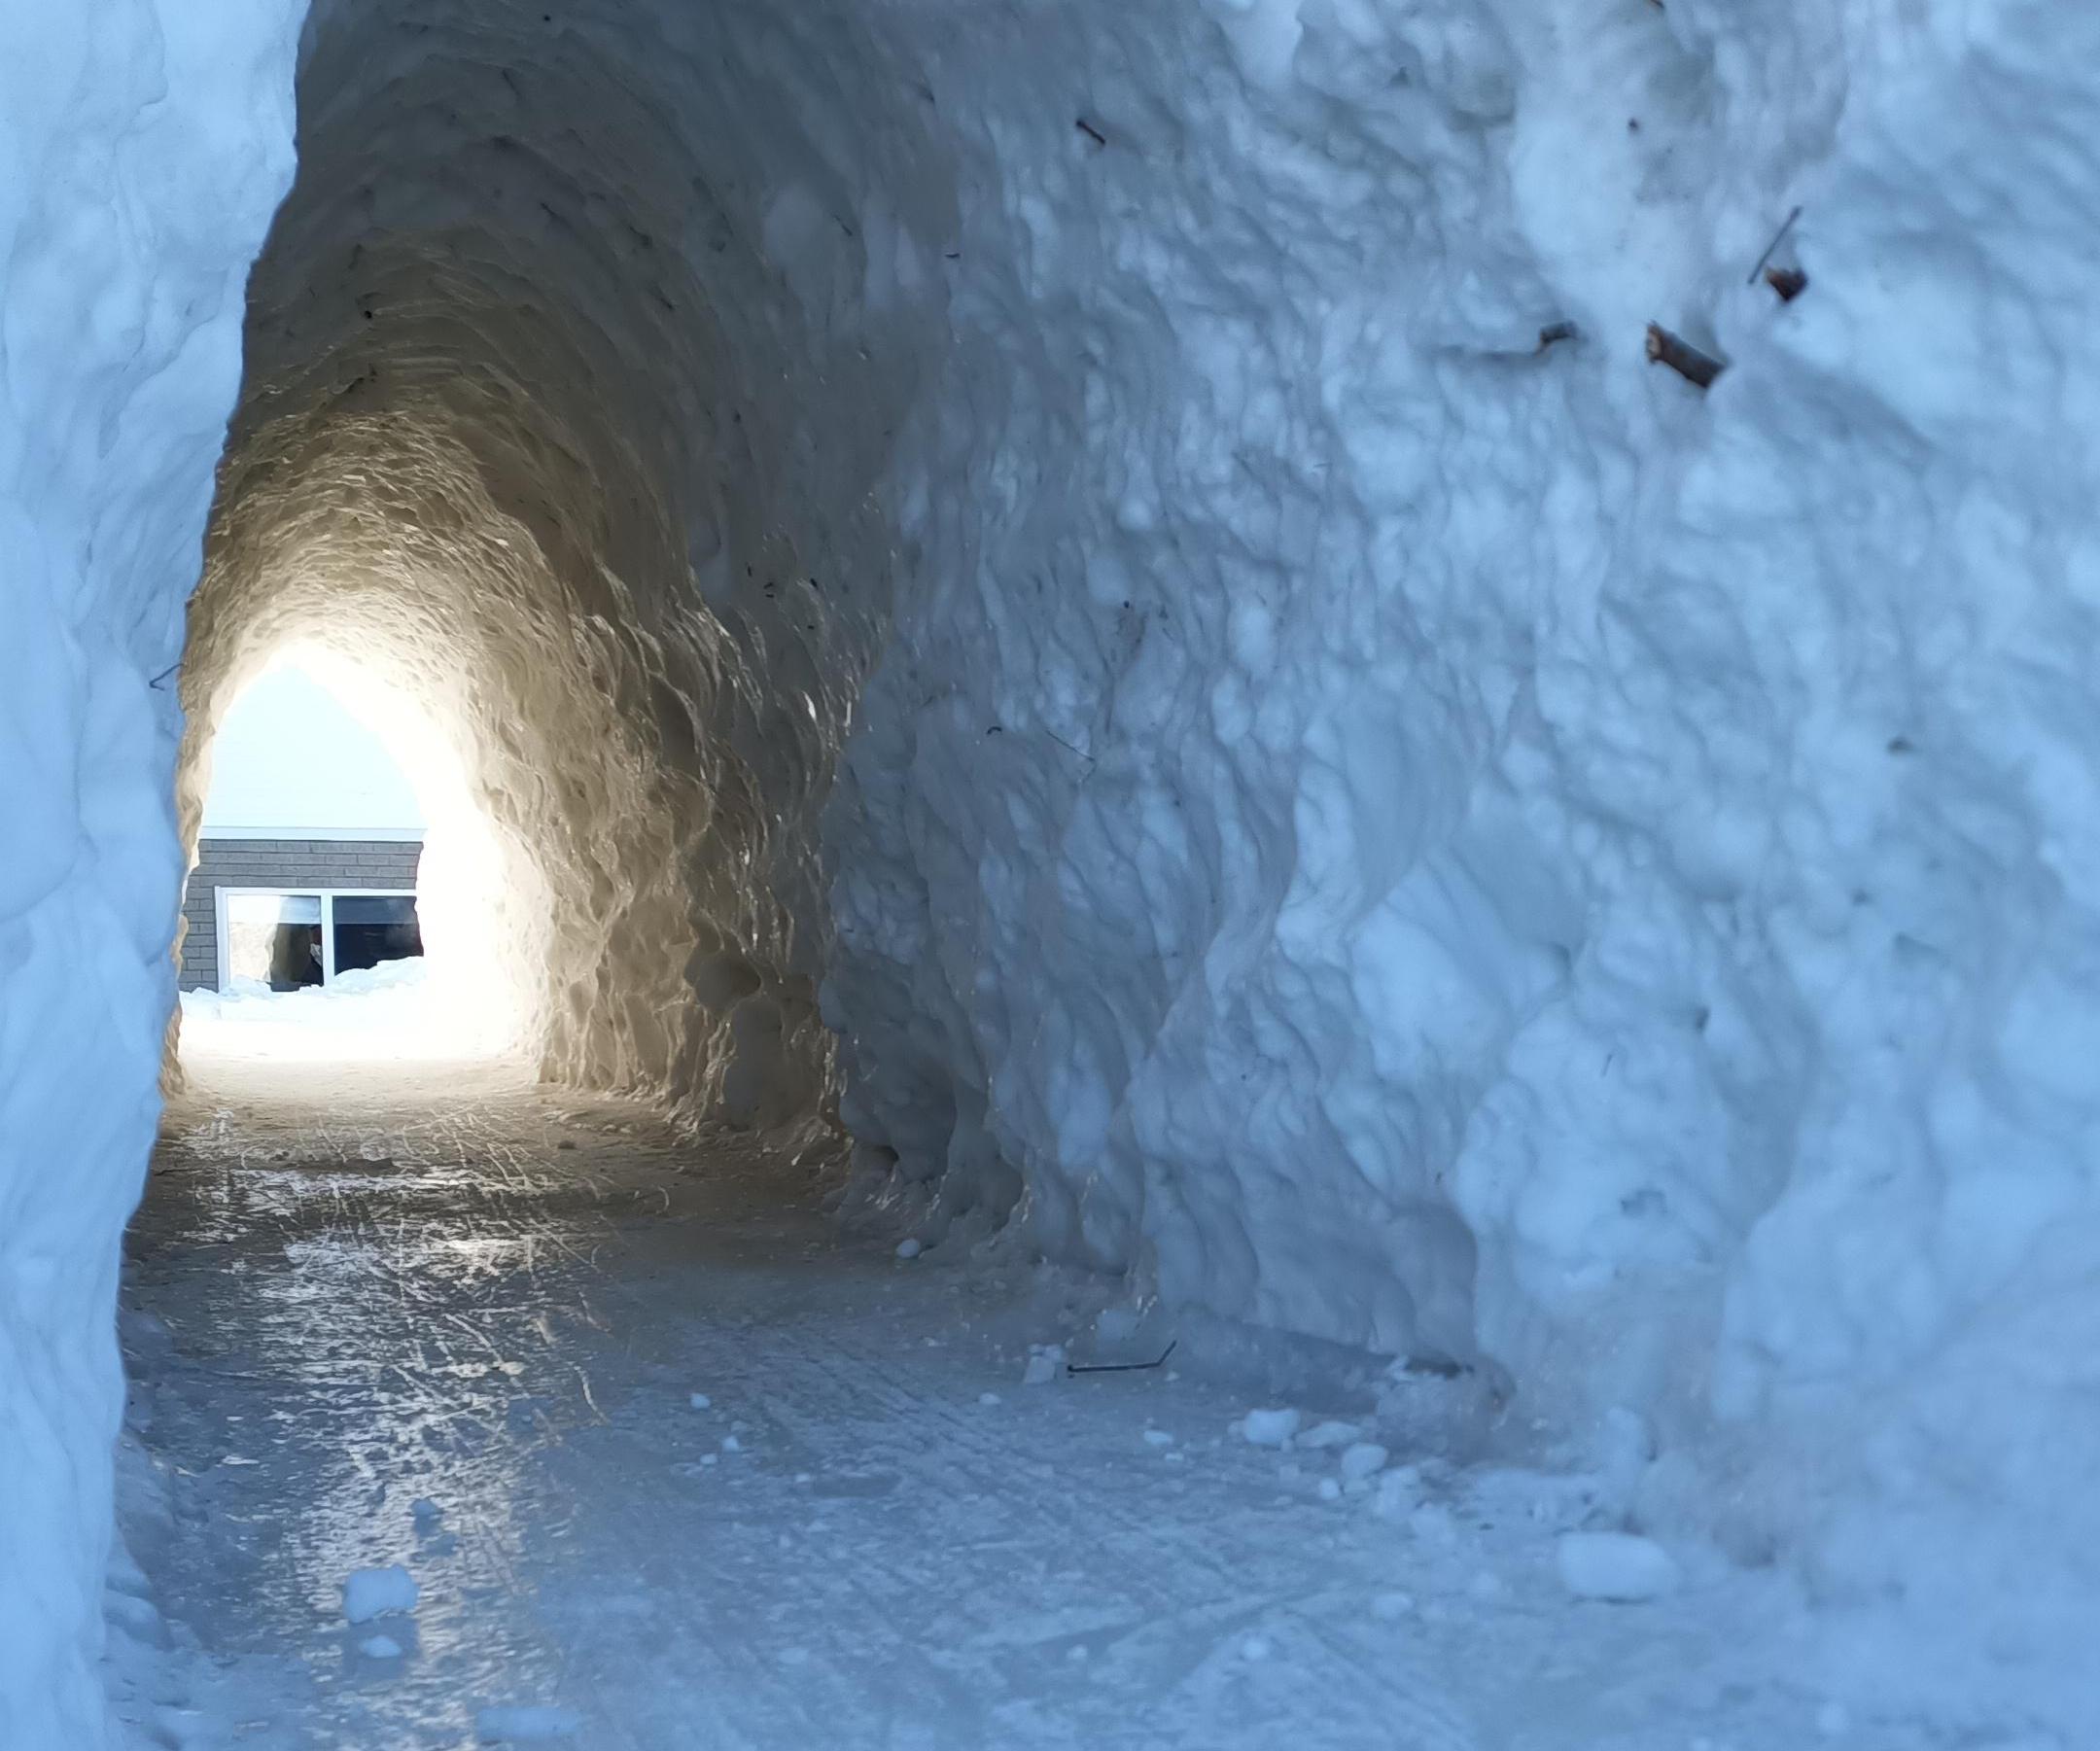 Making Ice Trails and Tunnels Through Snow